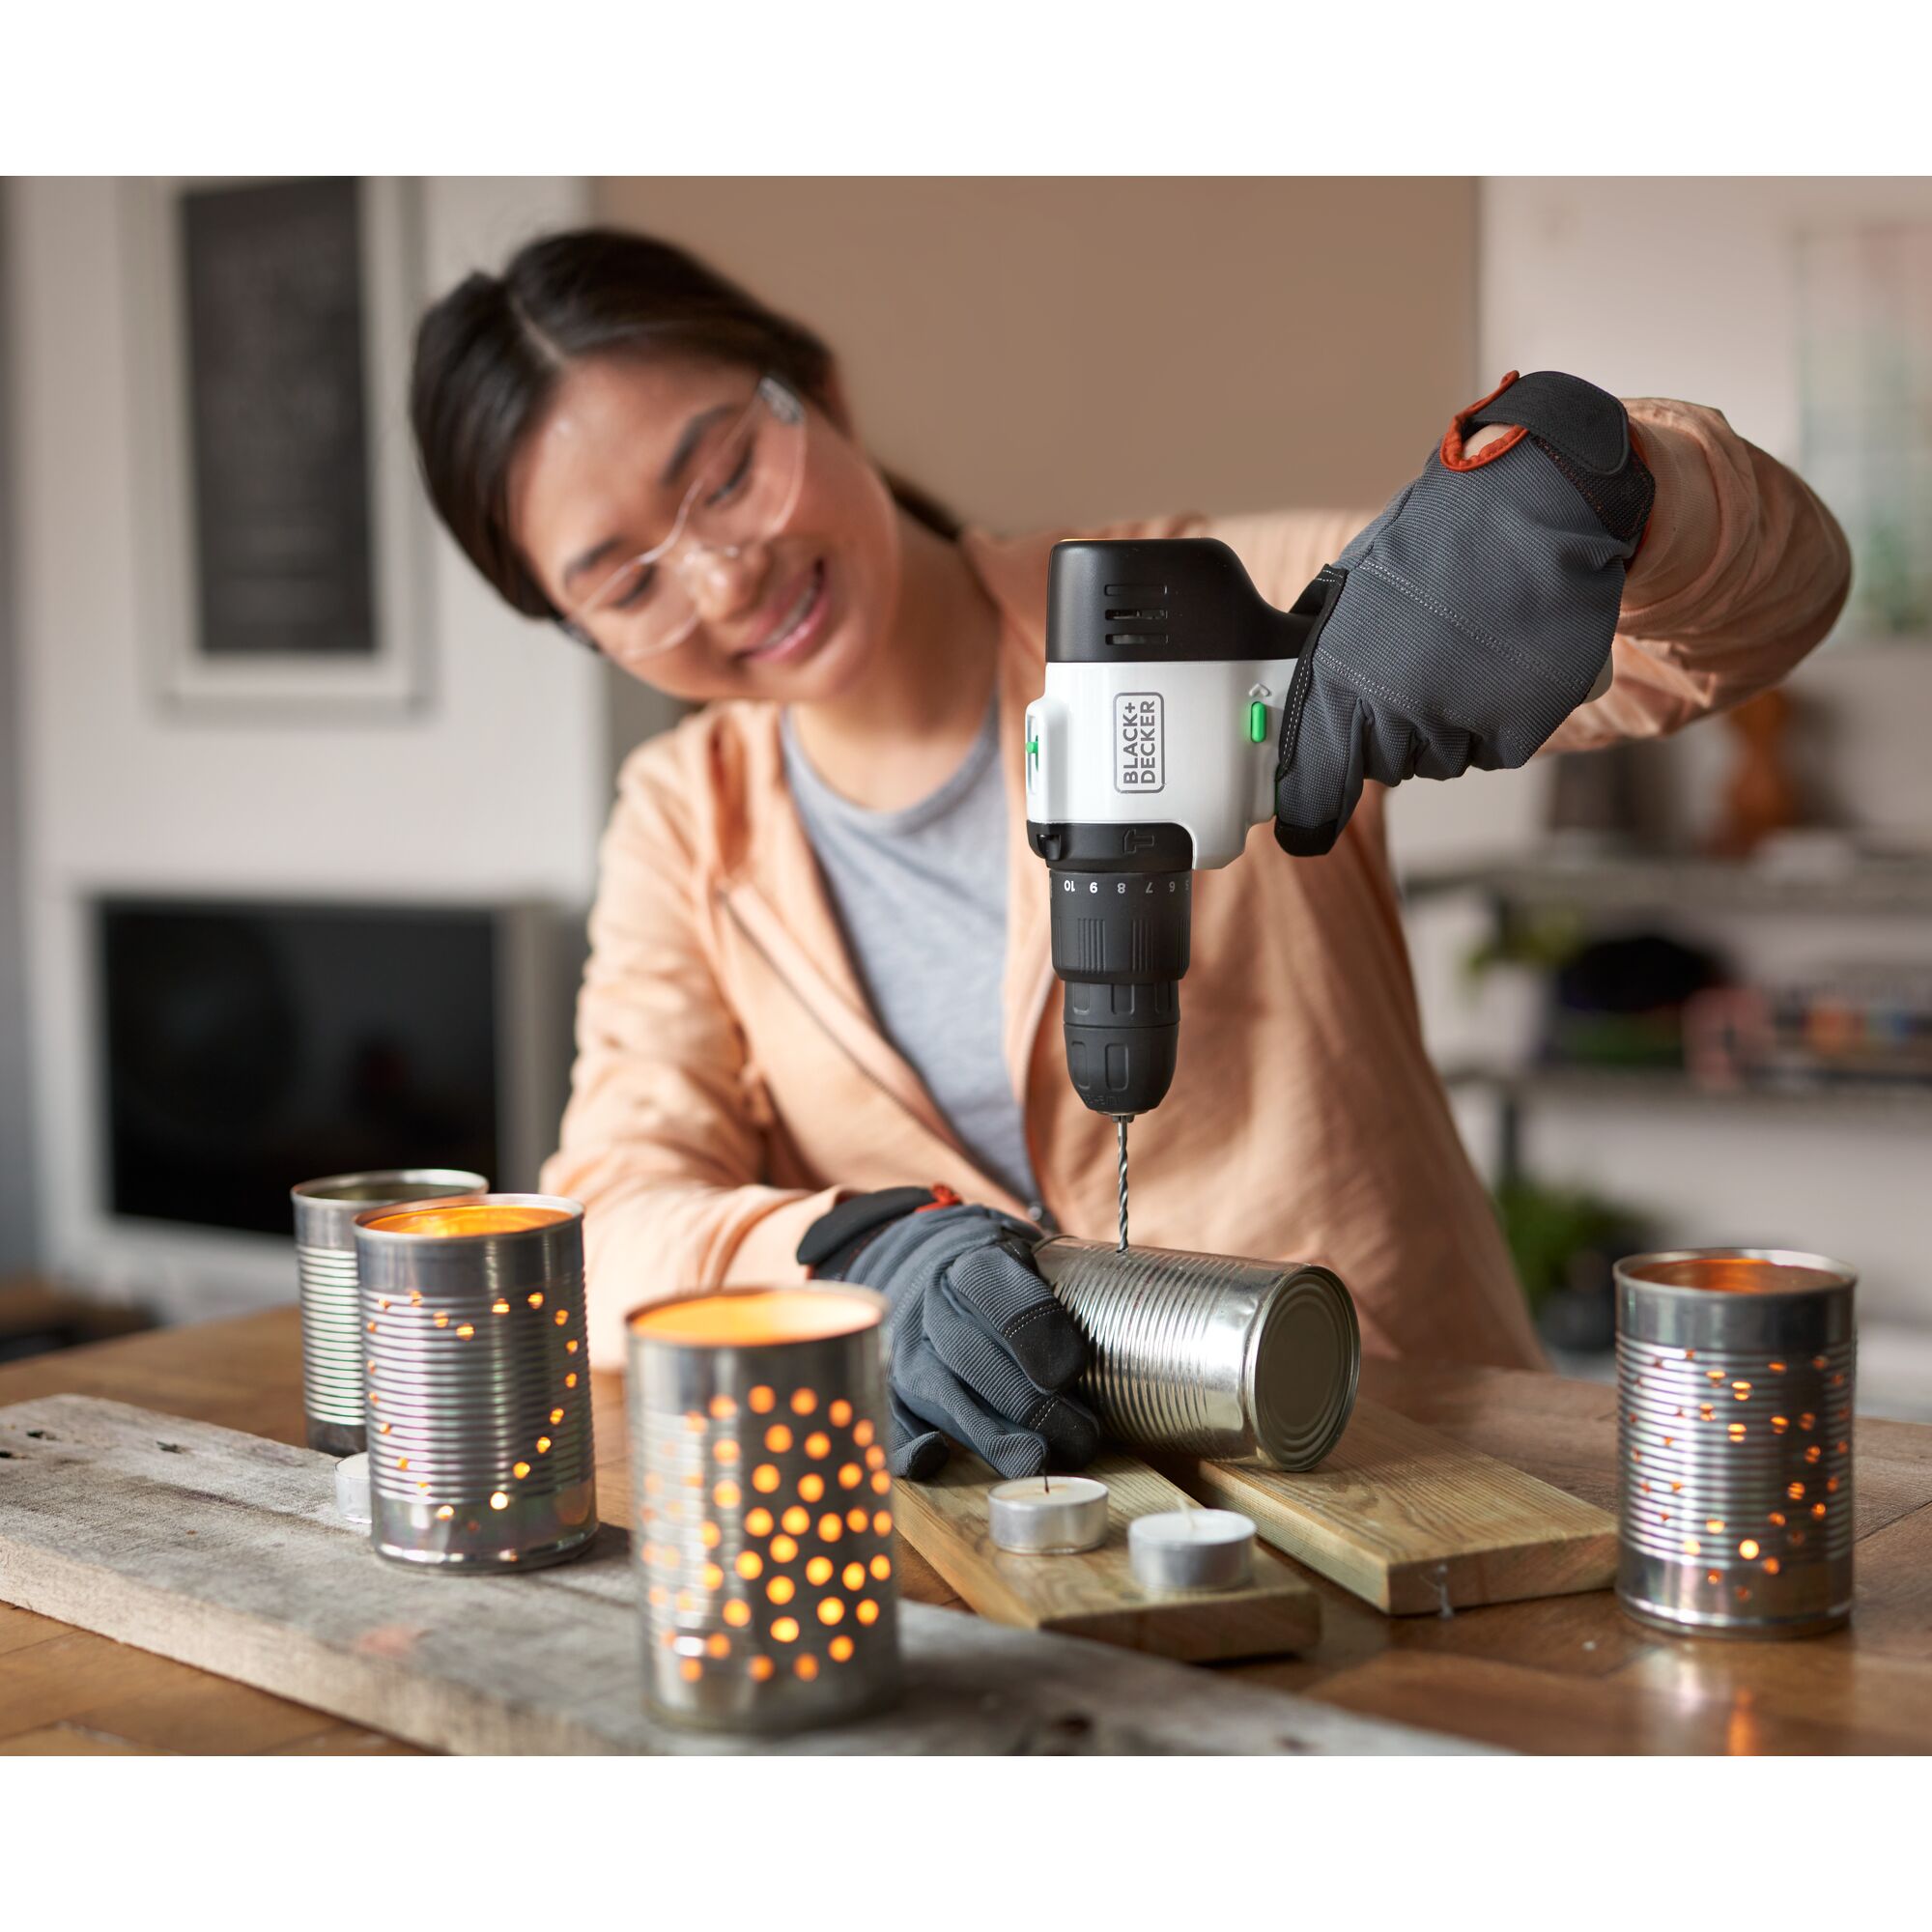 Woman using reviva™ 12V MAX* Hammer Drill/Driver to drill holes in soup cans for a craft project.